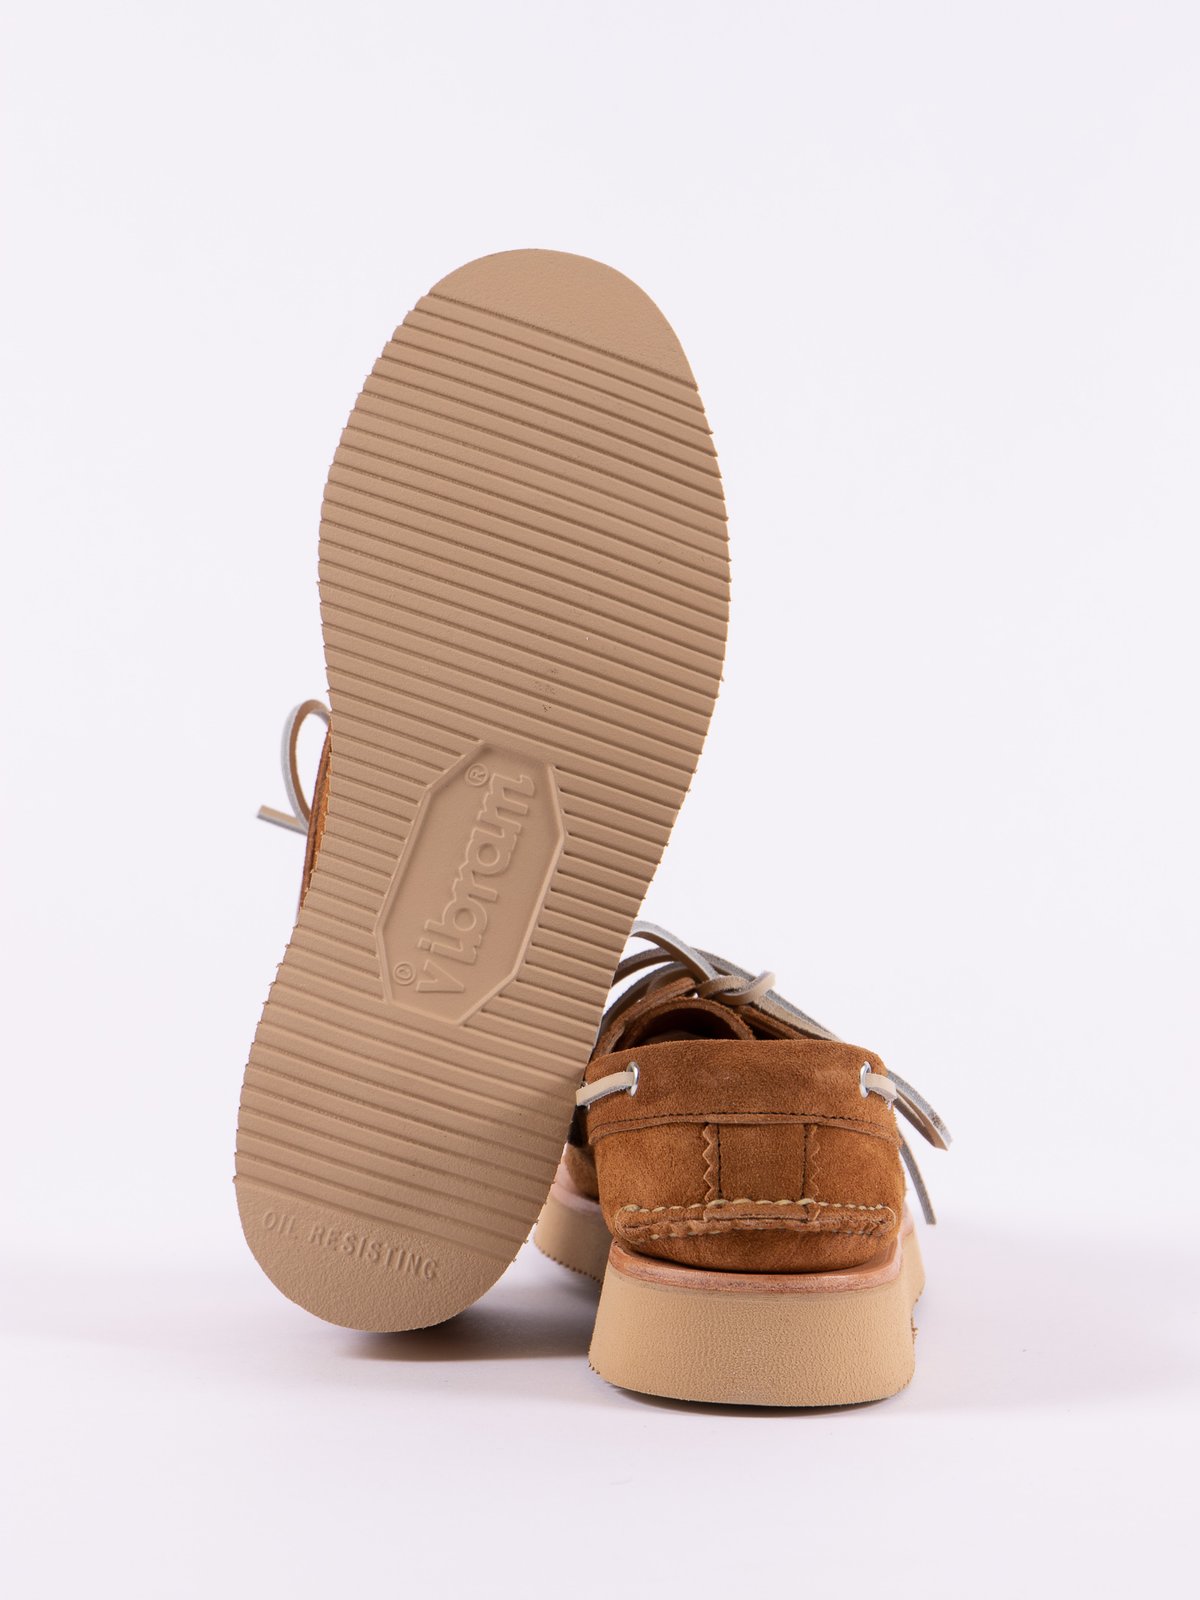 FO Golden Brown Boat Shoe Exclusive - Image 5